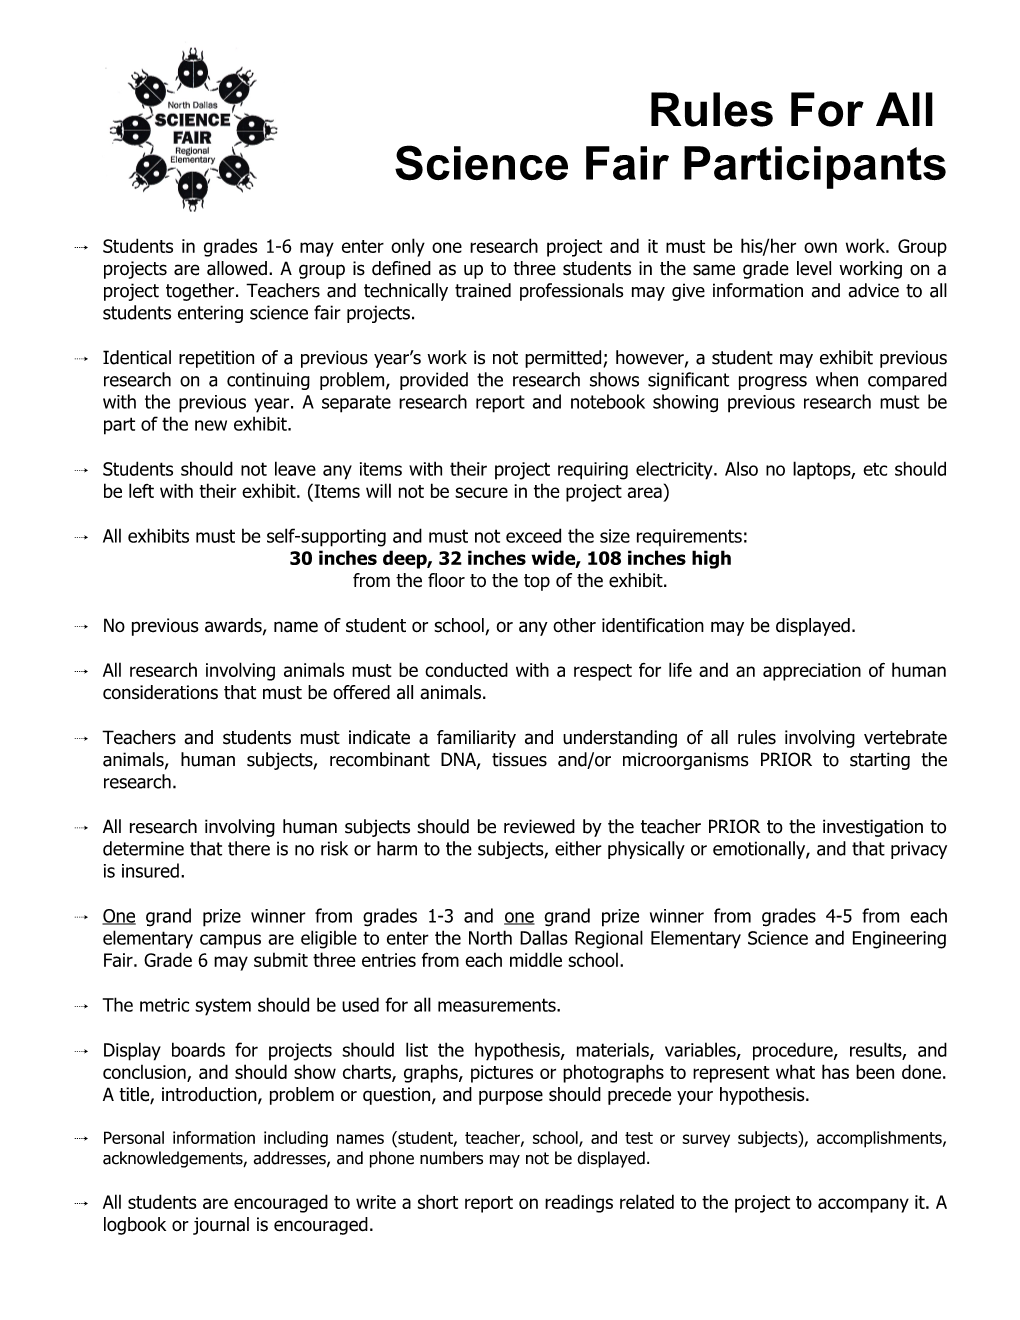 Rules for All Science Fair Participants